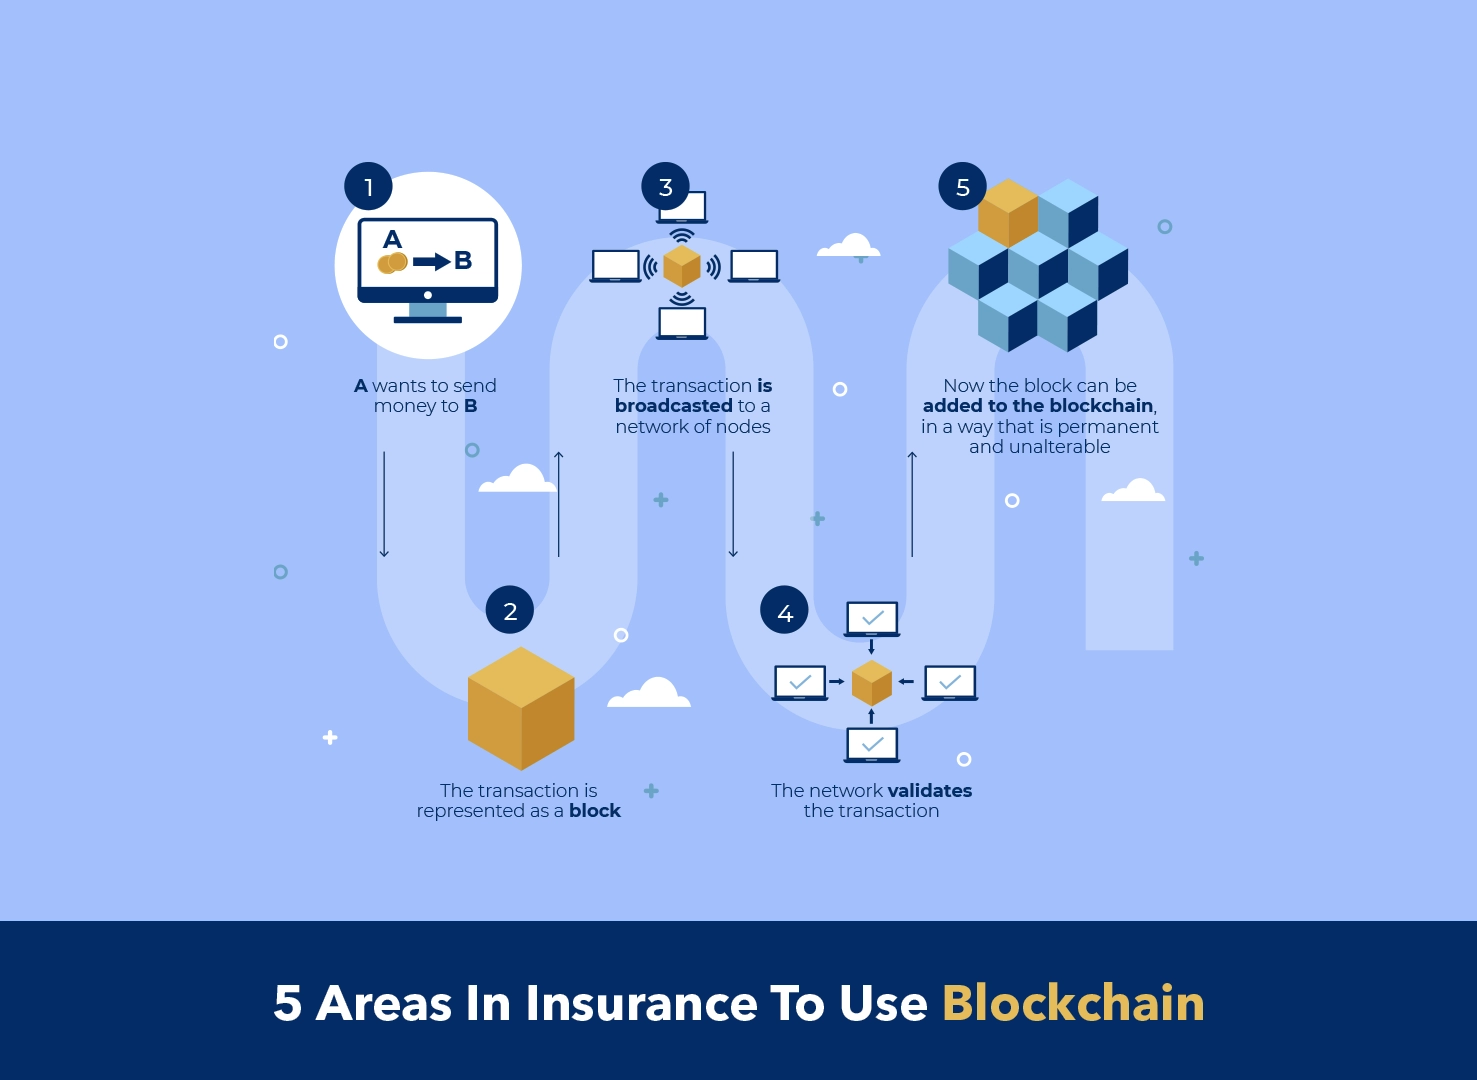 5 Areas in Insurance to Use Blockchain
